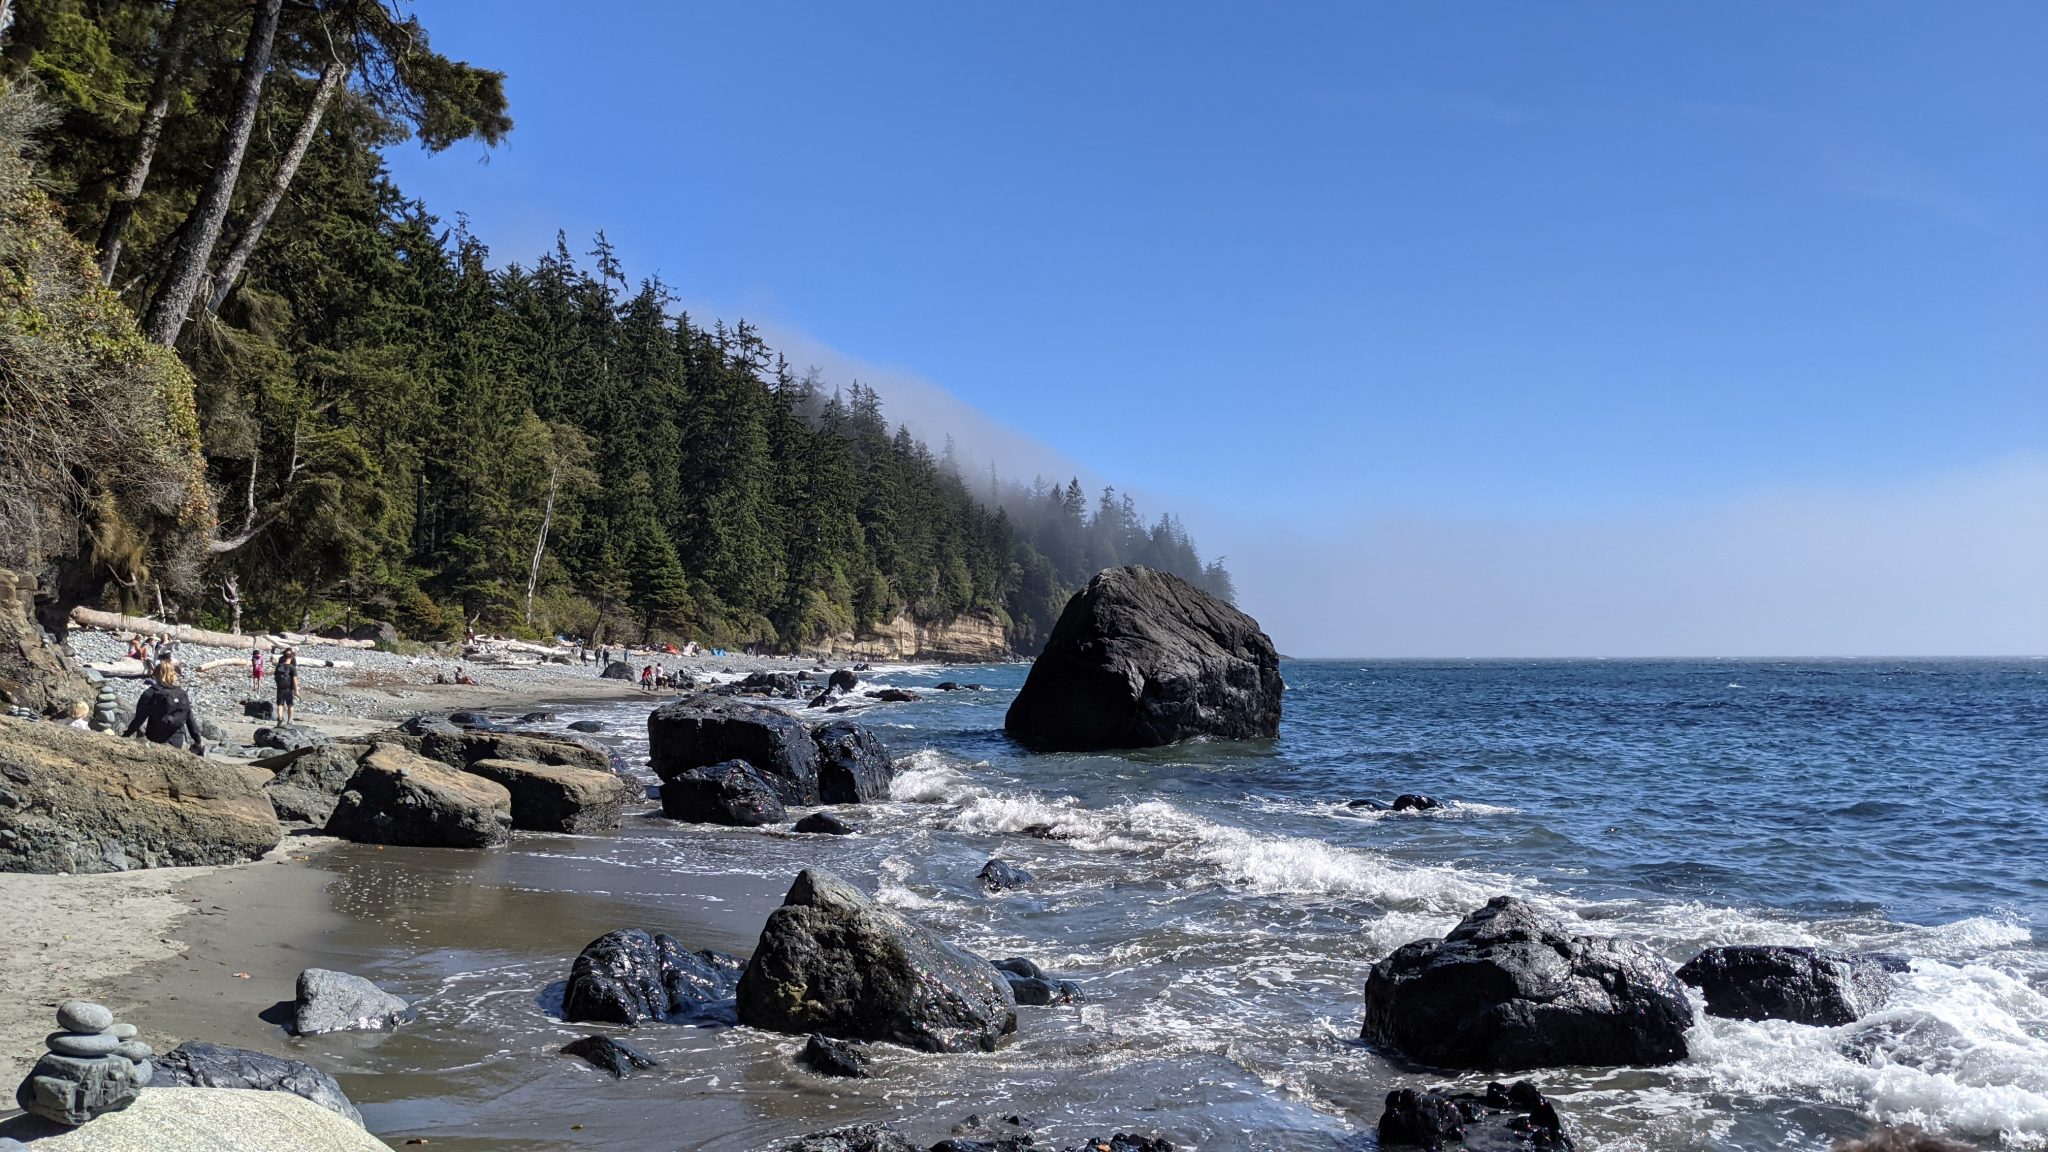 China Beach on Vancouver Island with waves breaking on large rocks and a cairn in the foreground